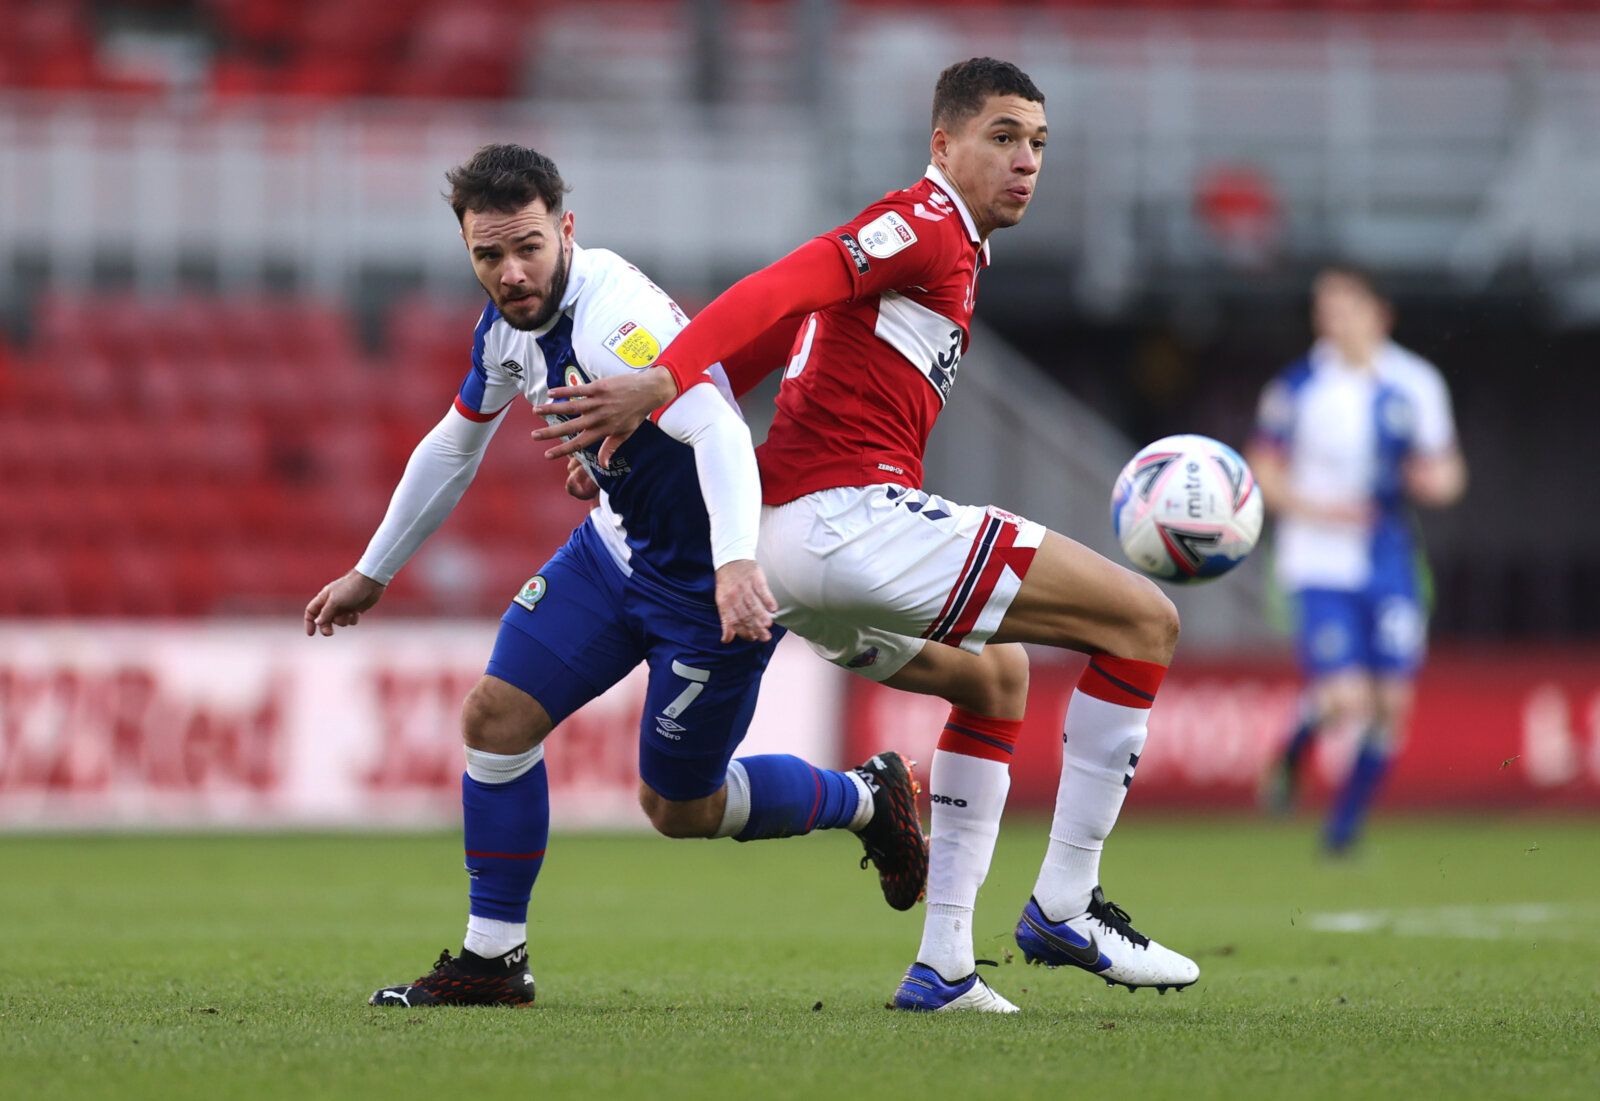 Soccer Football - Championship - Middlesbrough v Blackburn Rovers - Riverside Stadium, Middlesbrough, Britain - January 24, 2021 Middlesbrough's Dael Fry In action with Blackburn's Adam Armstrong Action Images/Lee Smith